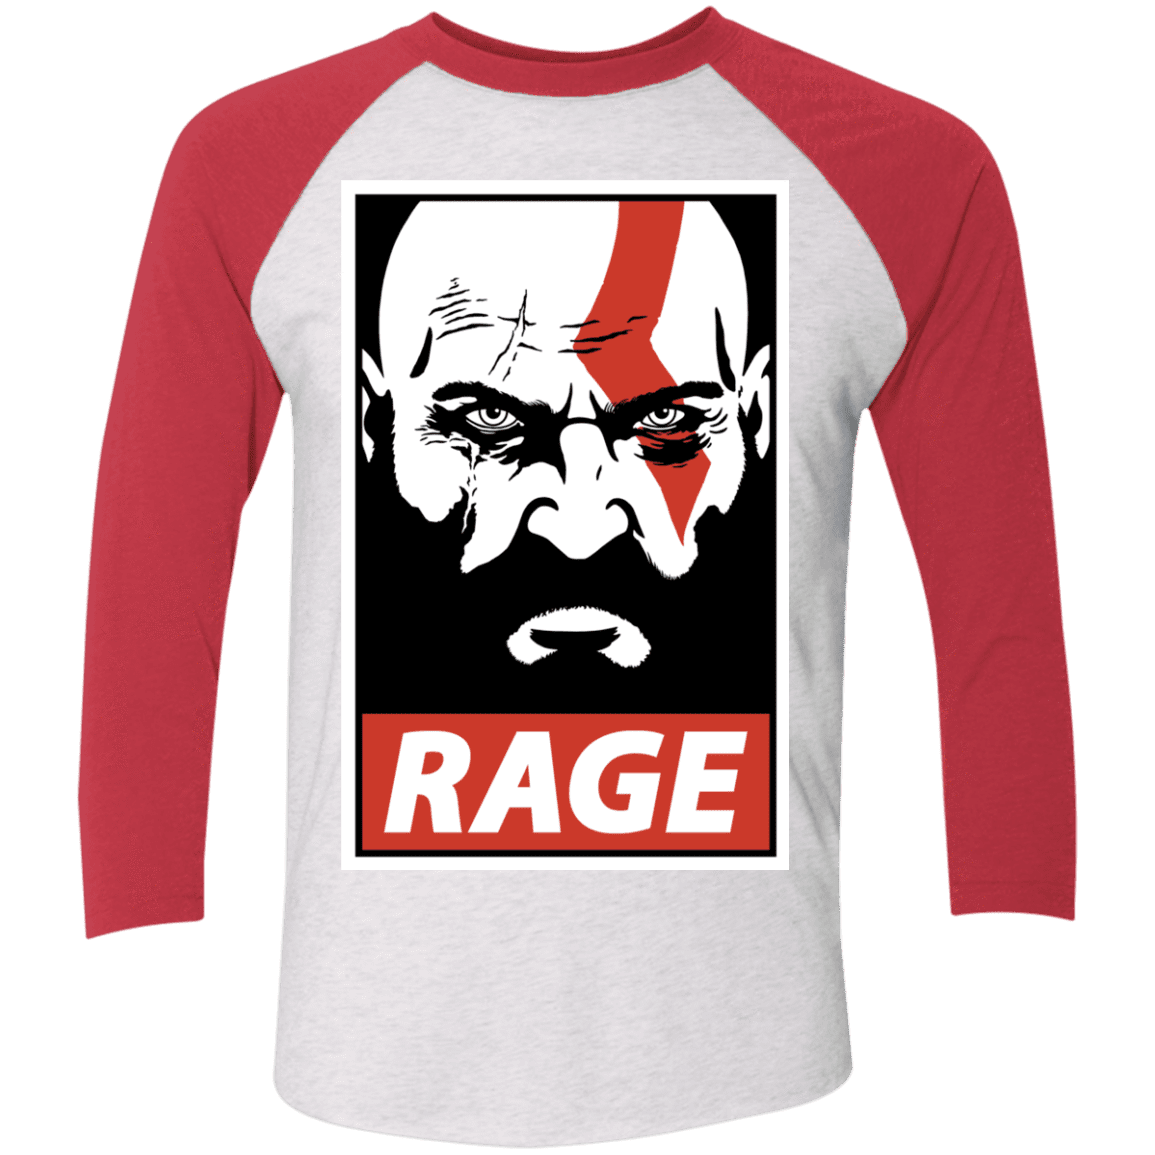 T-Shirts Heather White/Vintage Red / X-Small Spartan Rage Men's Triblend 3/4 Sleeve